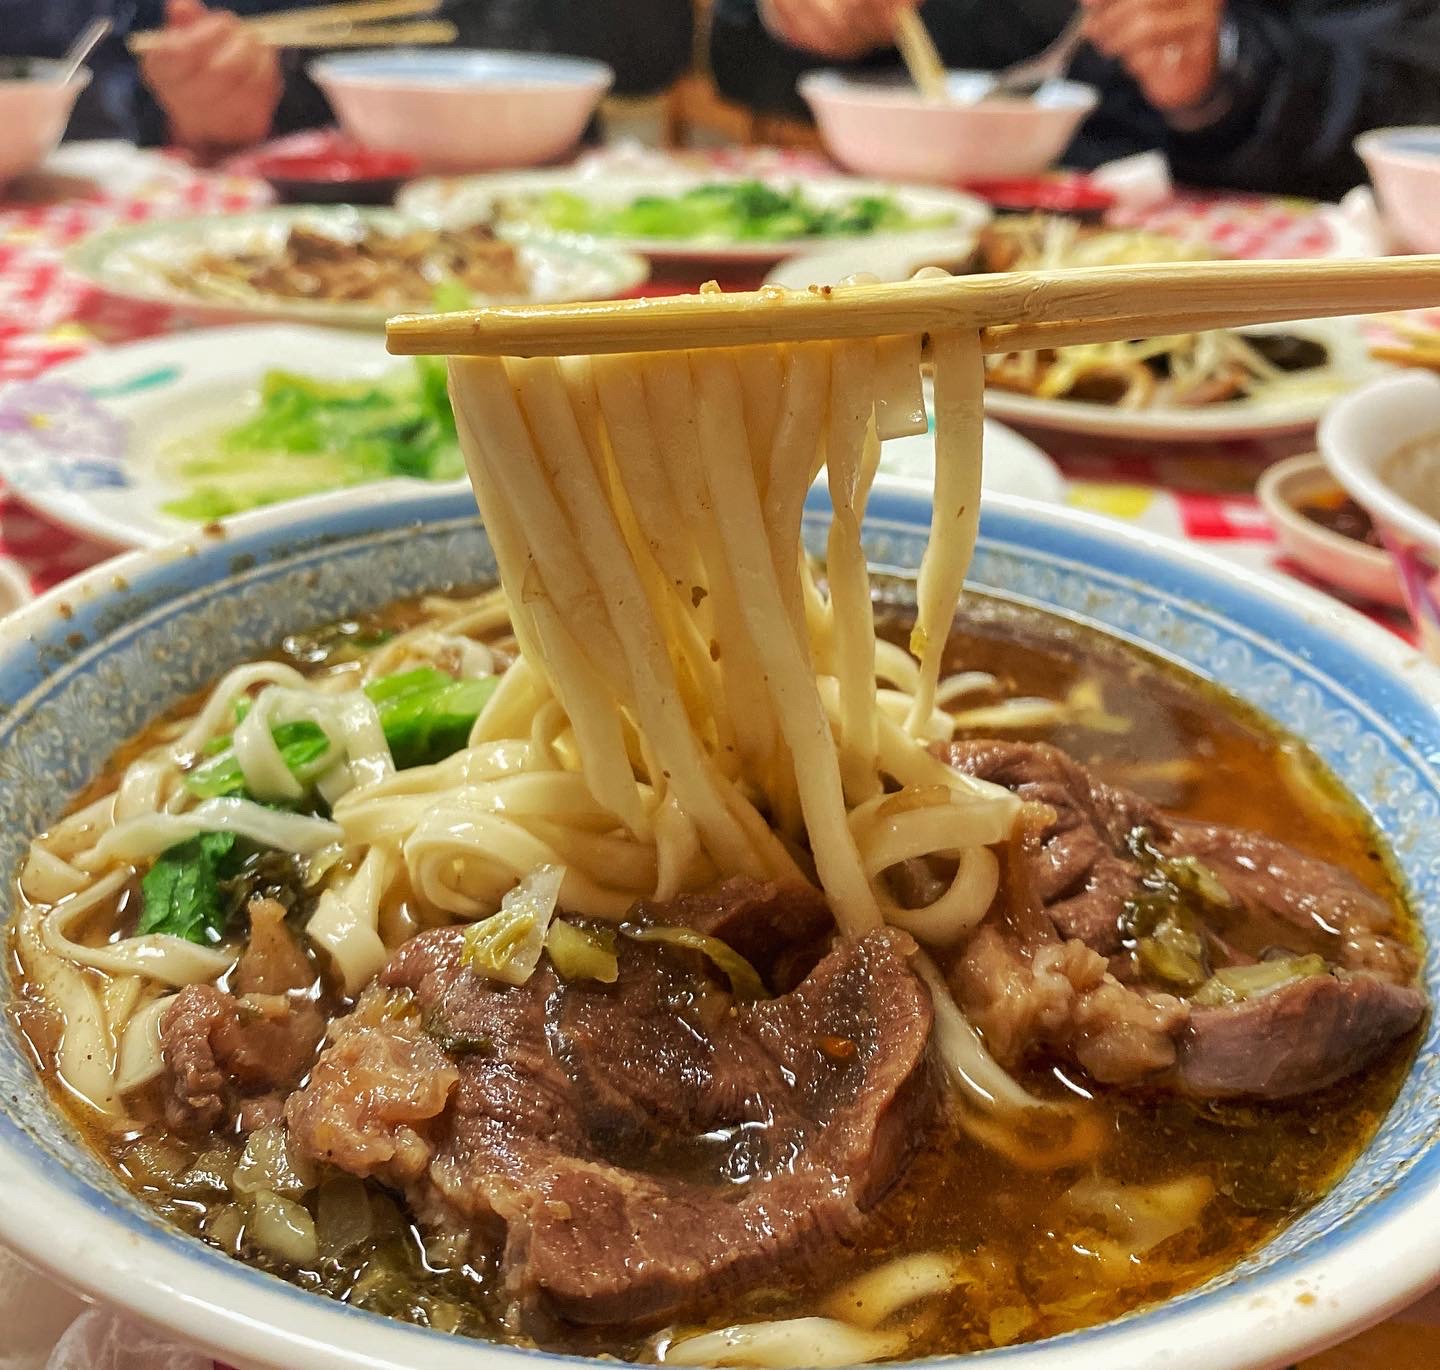 Miaoli delicacy “Houlong Haolai Xiang Beef Noodles, highly recommended by locals, the beef noodles that made the owner exclaim ‘Please don’t recommend it anymore!'”